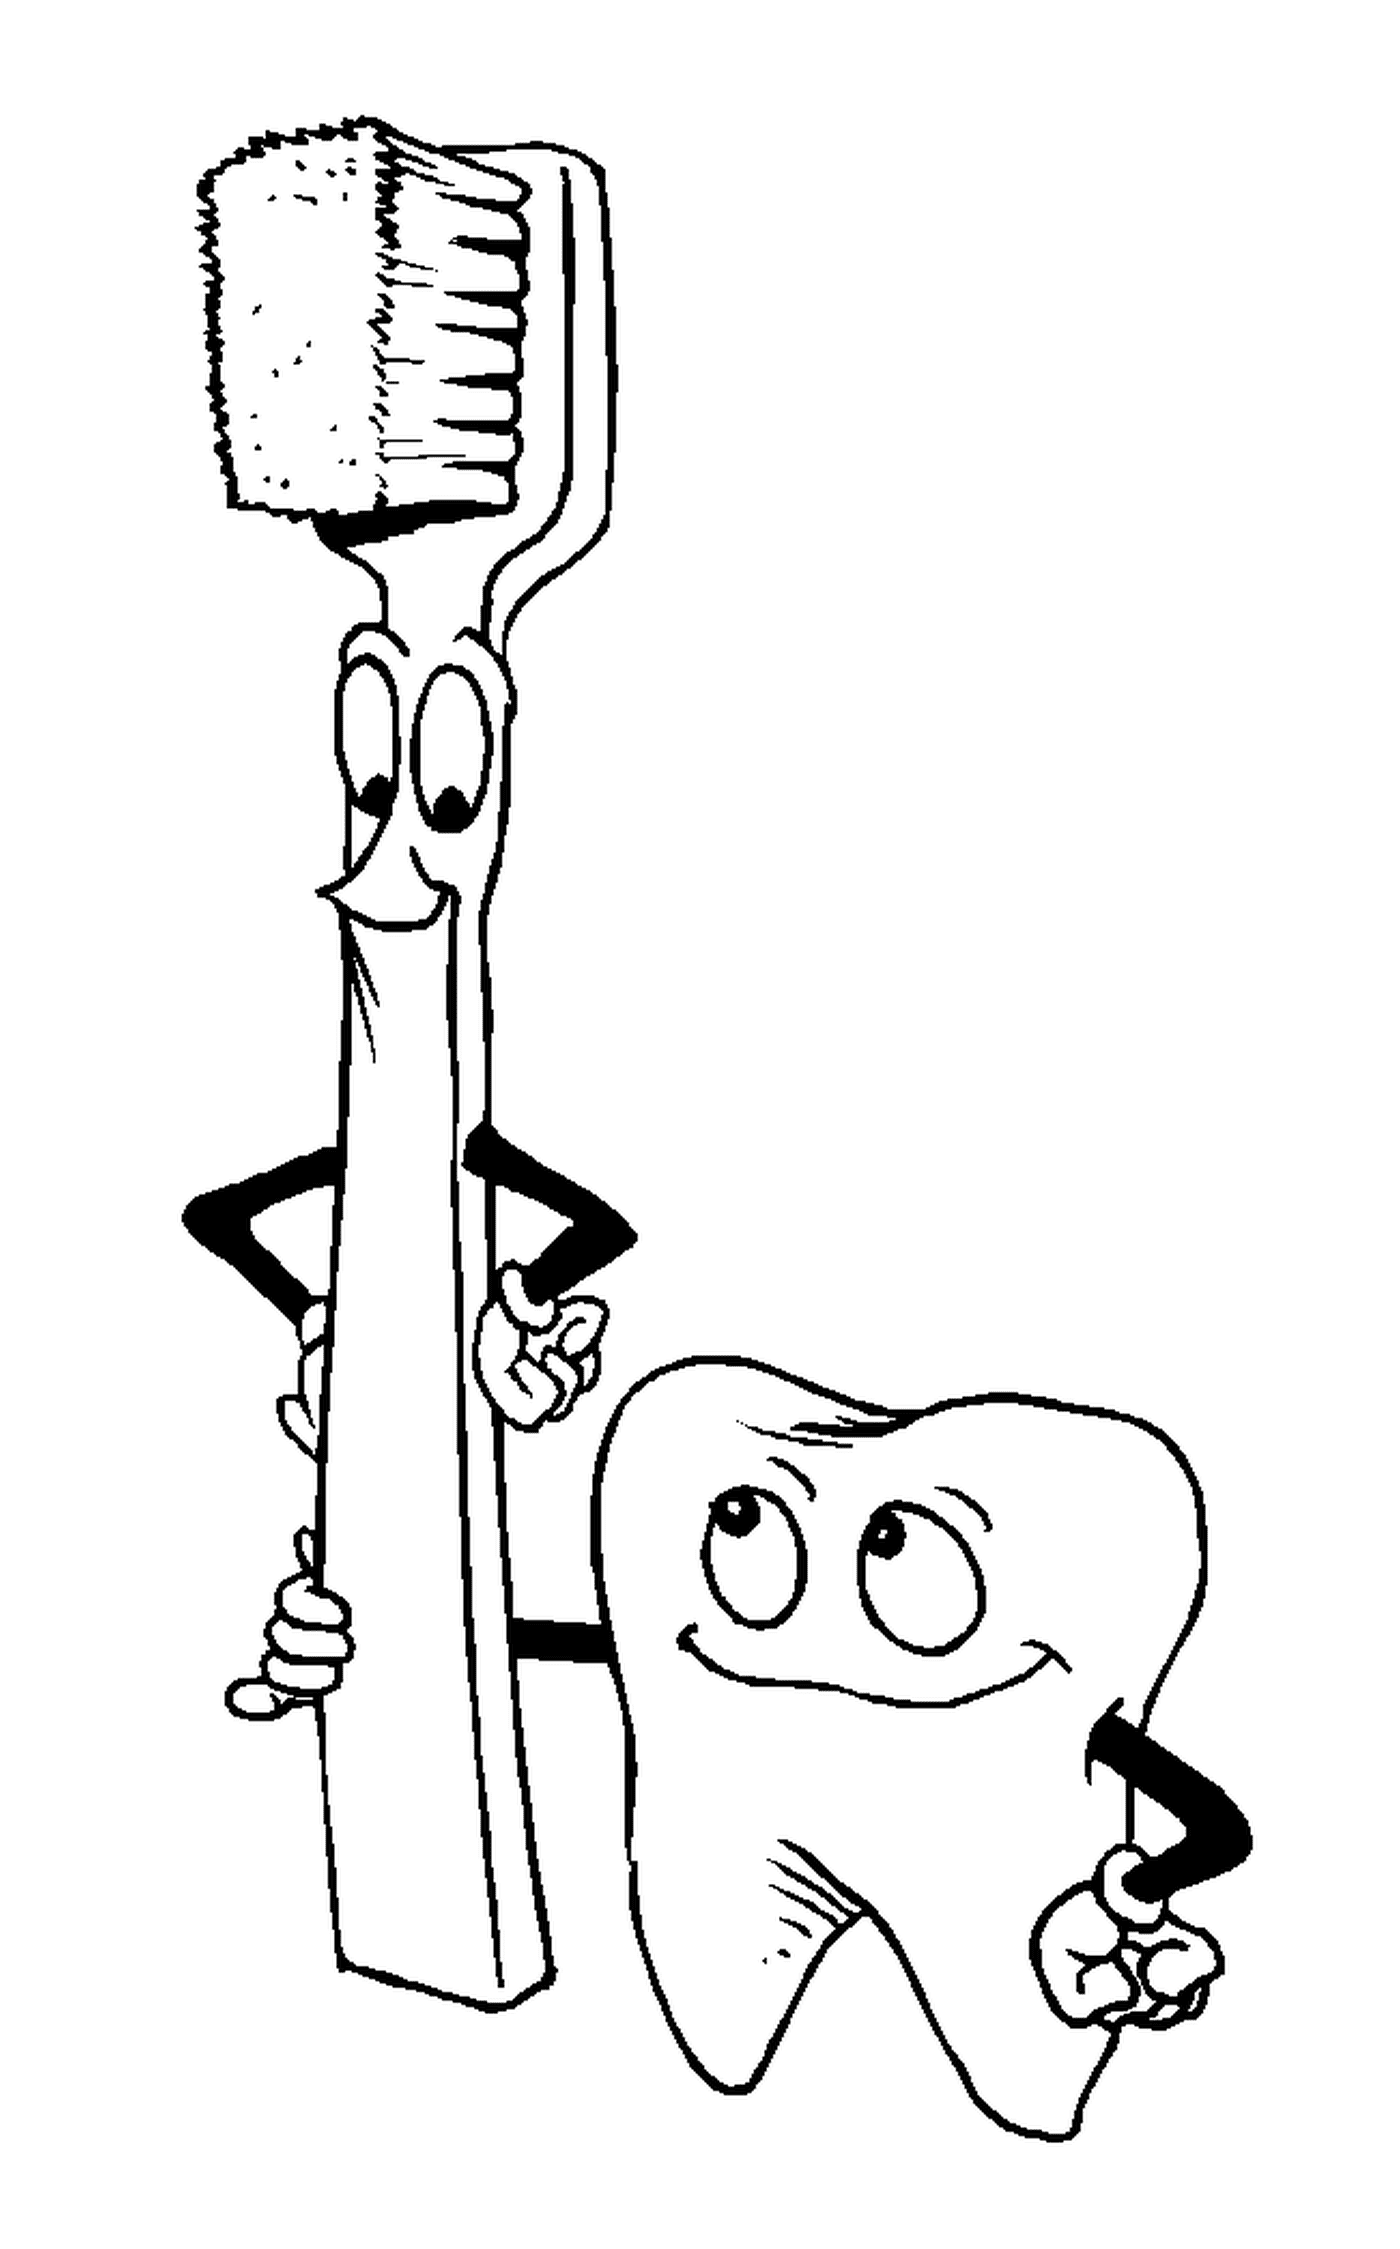  Tooth and toothbrush 